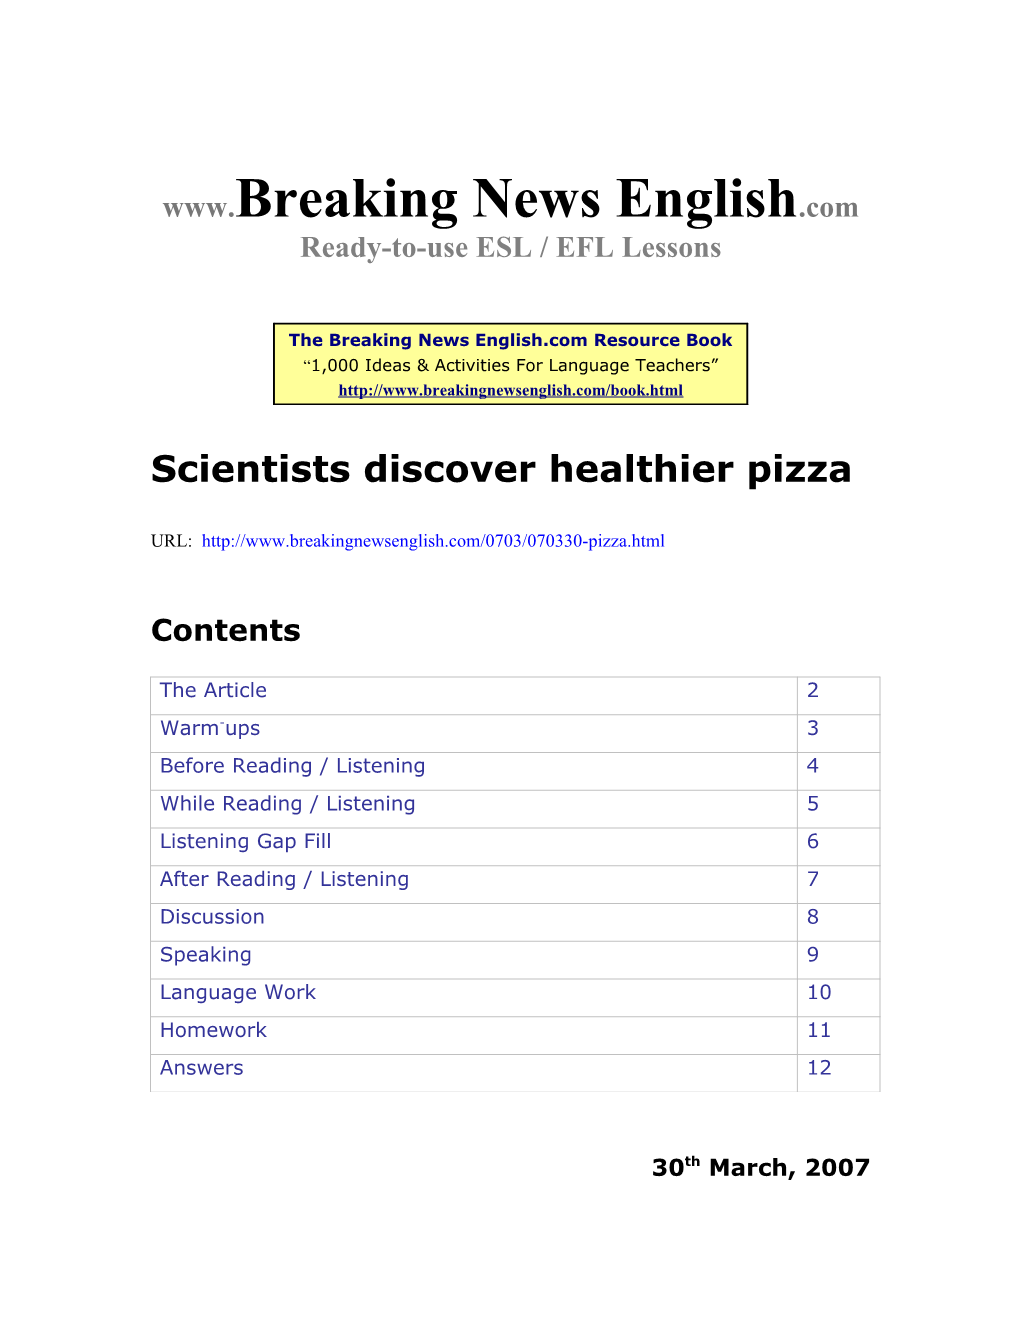 Scientists Discover Healthier Pizza